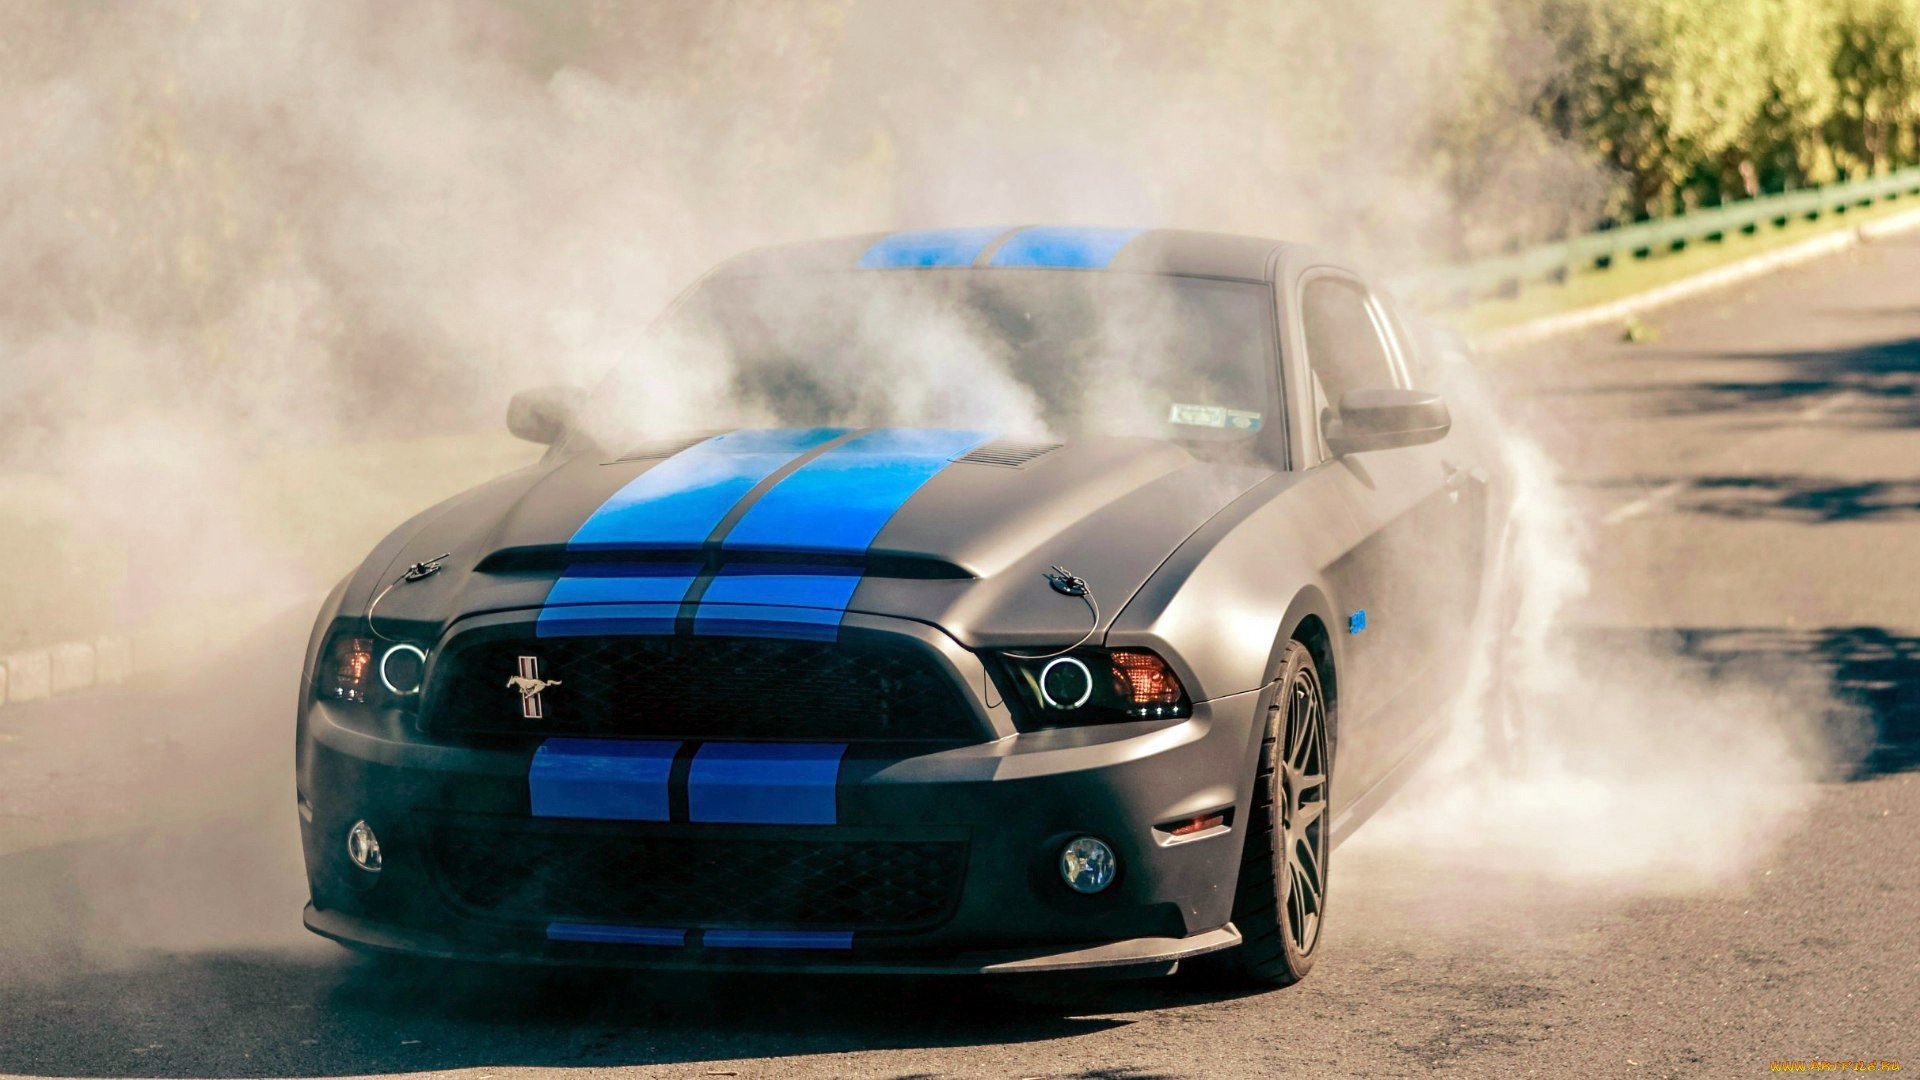 ford, Ford, Mustang, Burnout, Muscle, Car, Shelby, Gt500, Shelby, Gt, 500, Gt, 500, Supersnake, Mustang, Gt Wallpaper